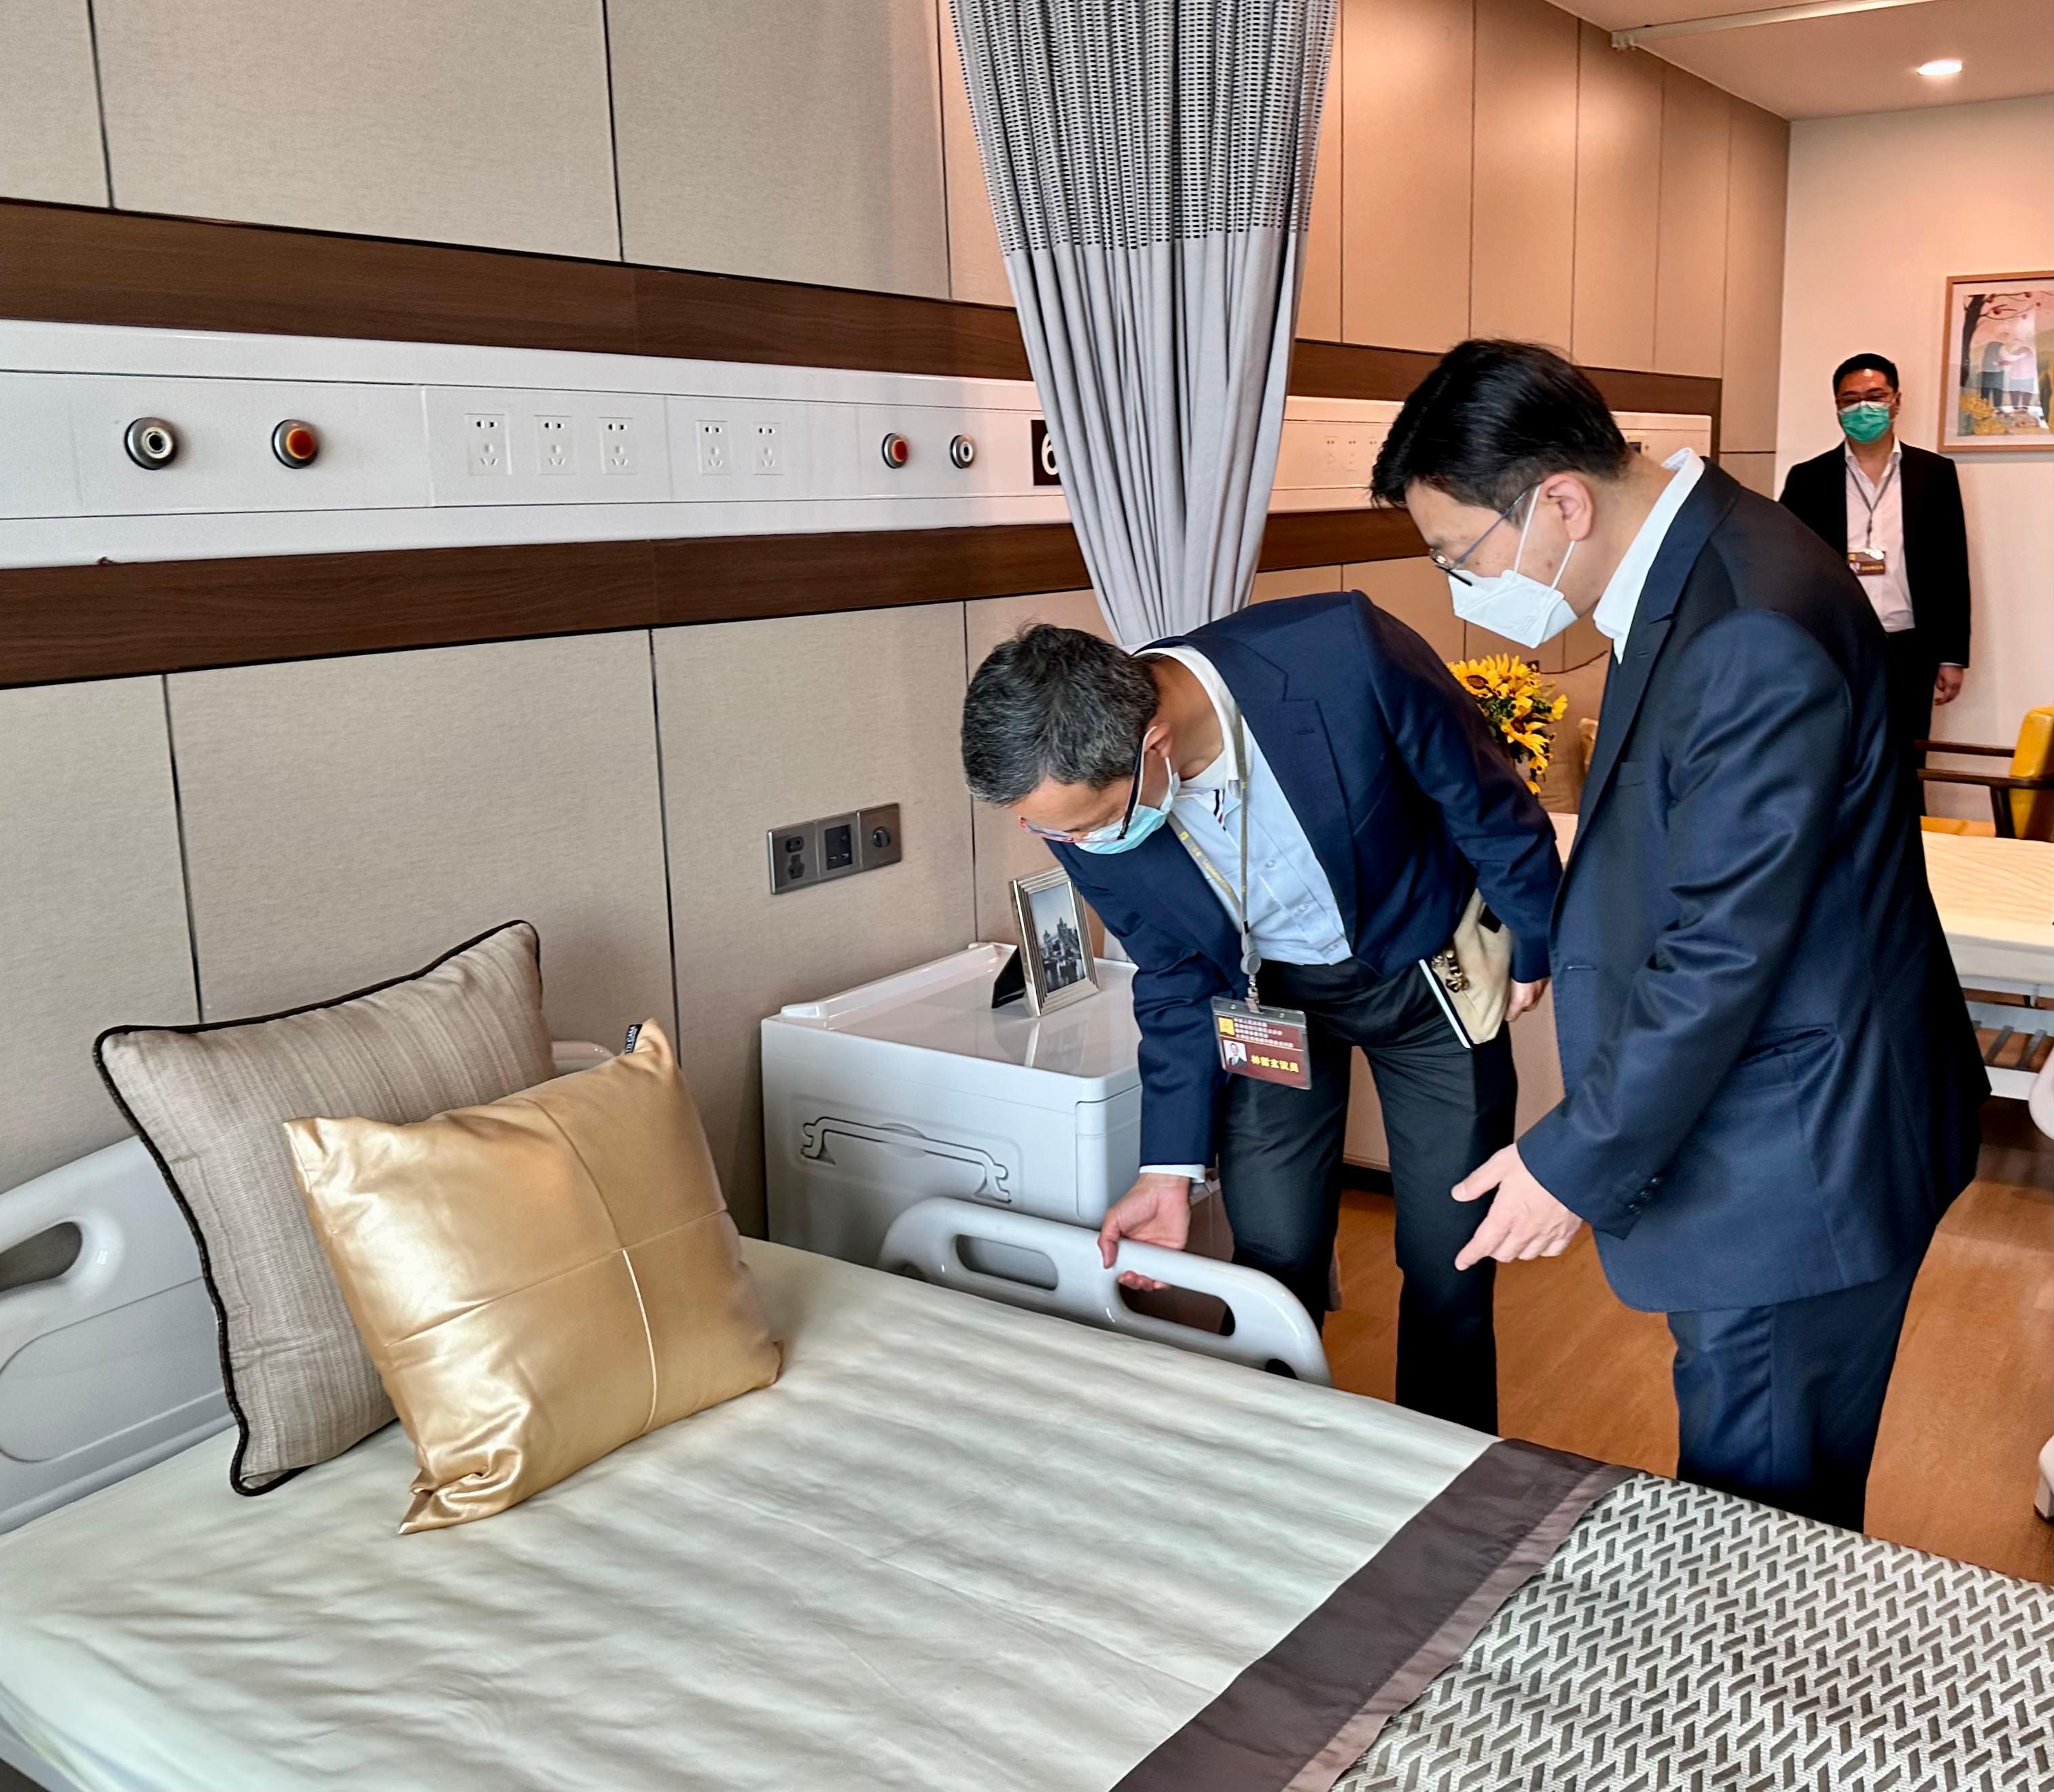 The Secretary for Labour and Welfare, Mr Chris Sun, leading a delegation of the Labour and Welfare Bureau, today (August 30) started his visit to three Mainland cities in the Guangdong-Hong Kong-Macao Greater Bay Area, together with a delegation of the Legislative Council Panel on Welfare Services. Photo shows Mr Sun (right) taking a closer look at a residential care place for the elderly in the Clifford Care Center while in Guangzhou this afternoon.